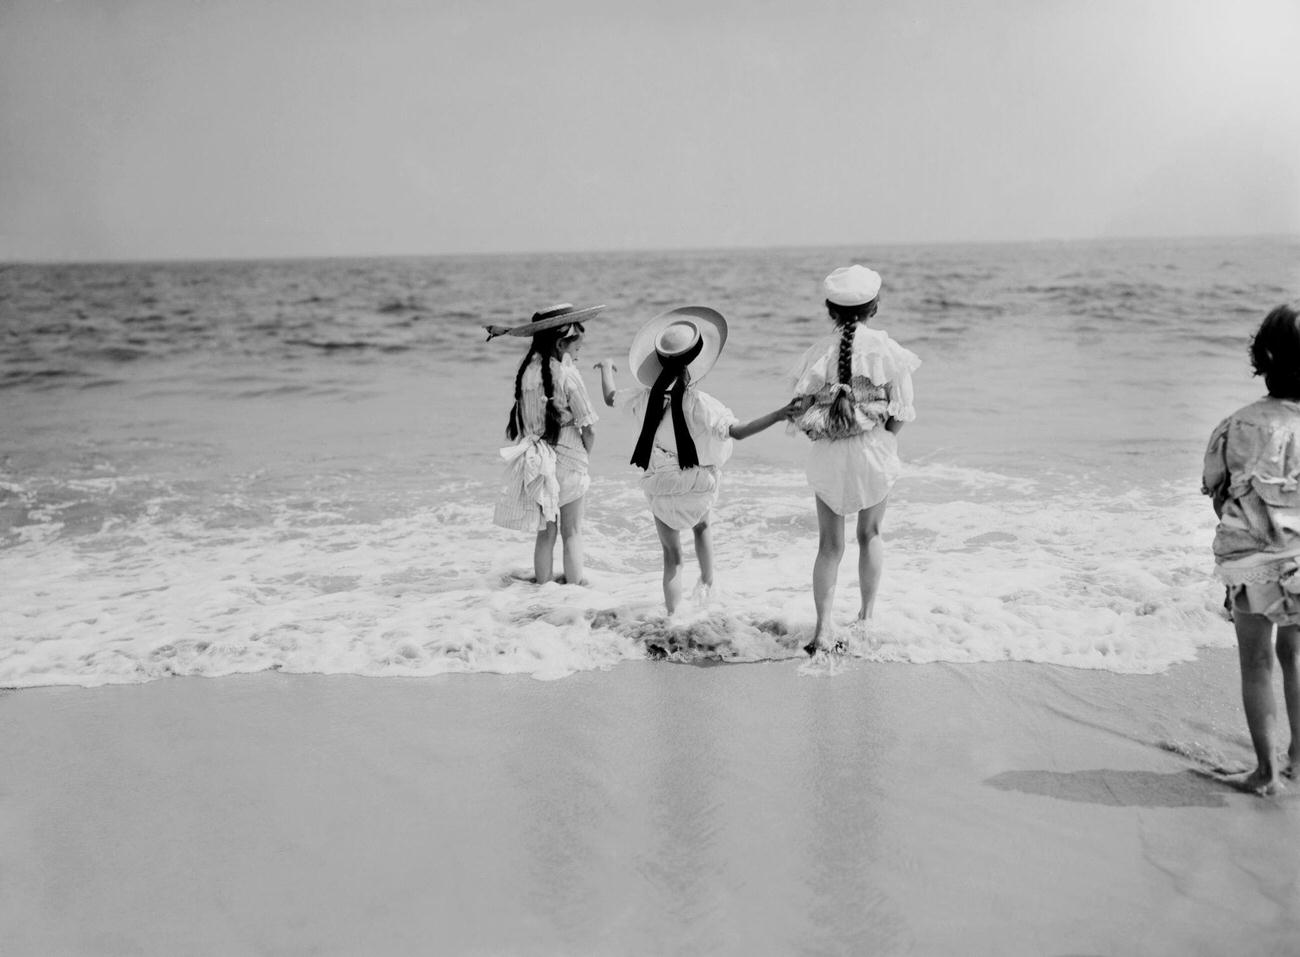 Three Young Girls Wading Into Water At Coney Island, Brooklyn, 1905